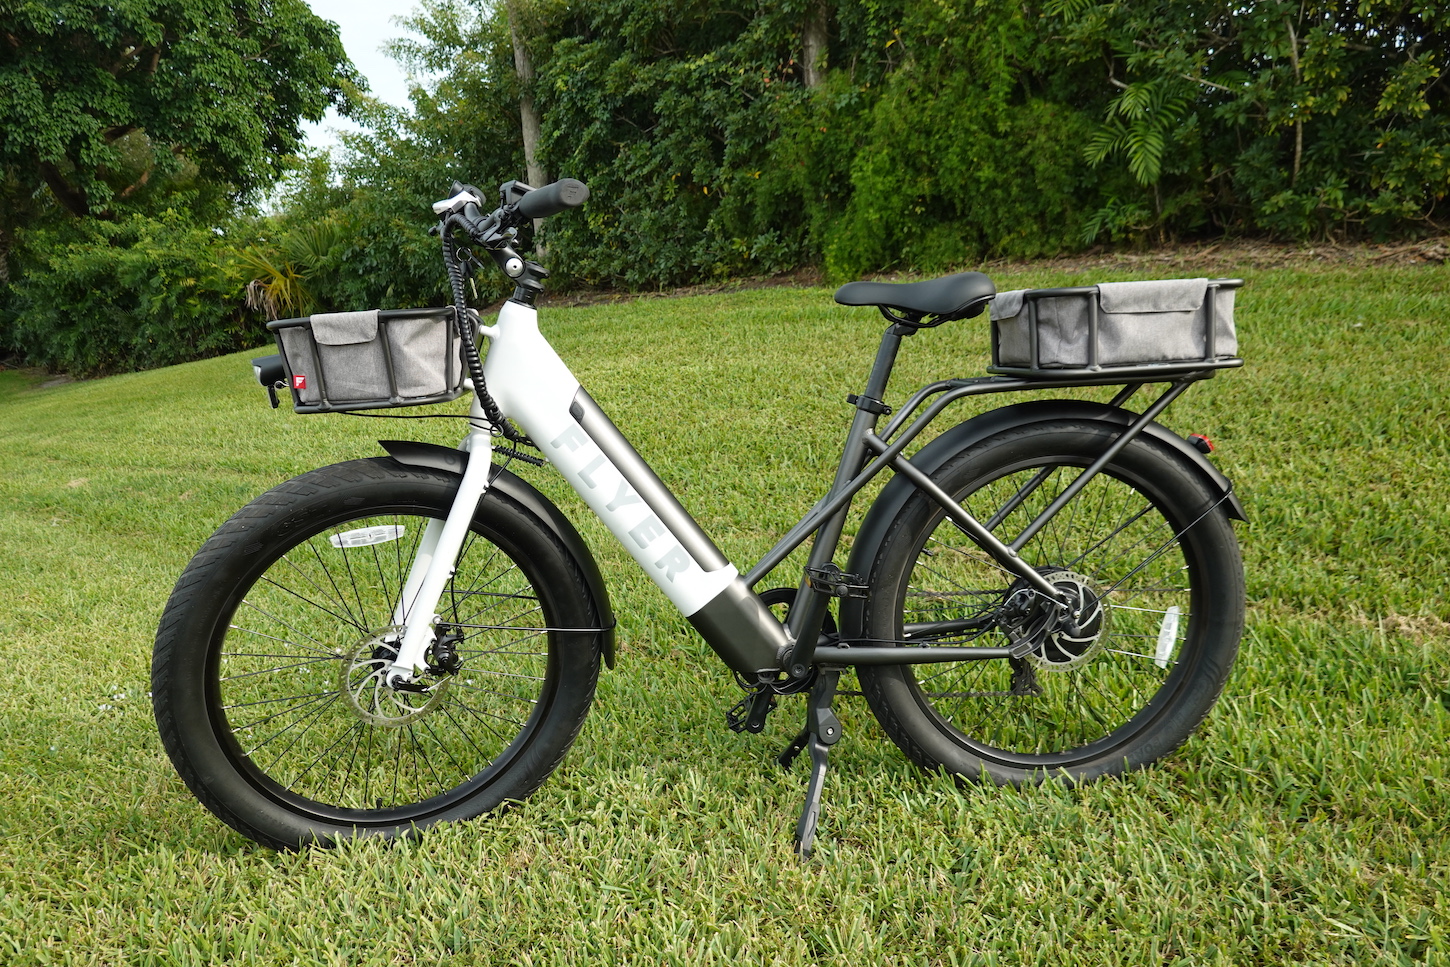 Flyer M880 review: Radio Flyer's electric bikes are as fun as their wagons!